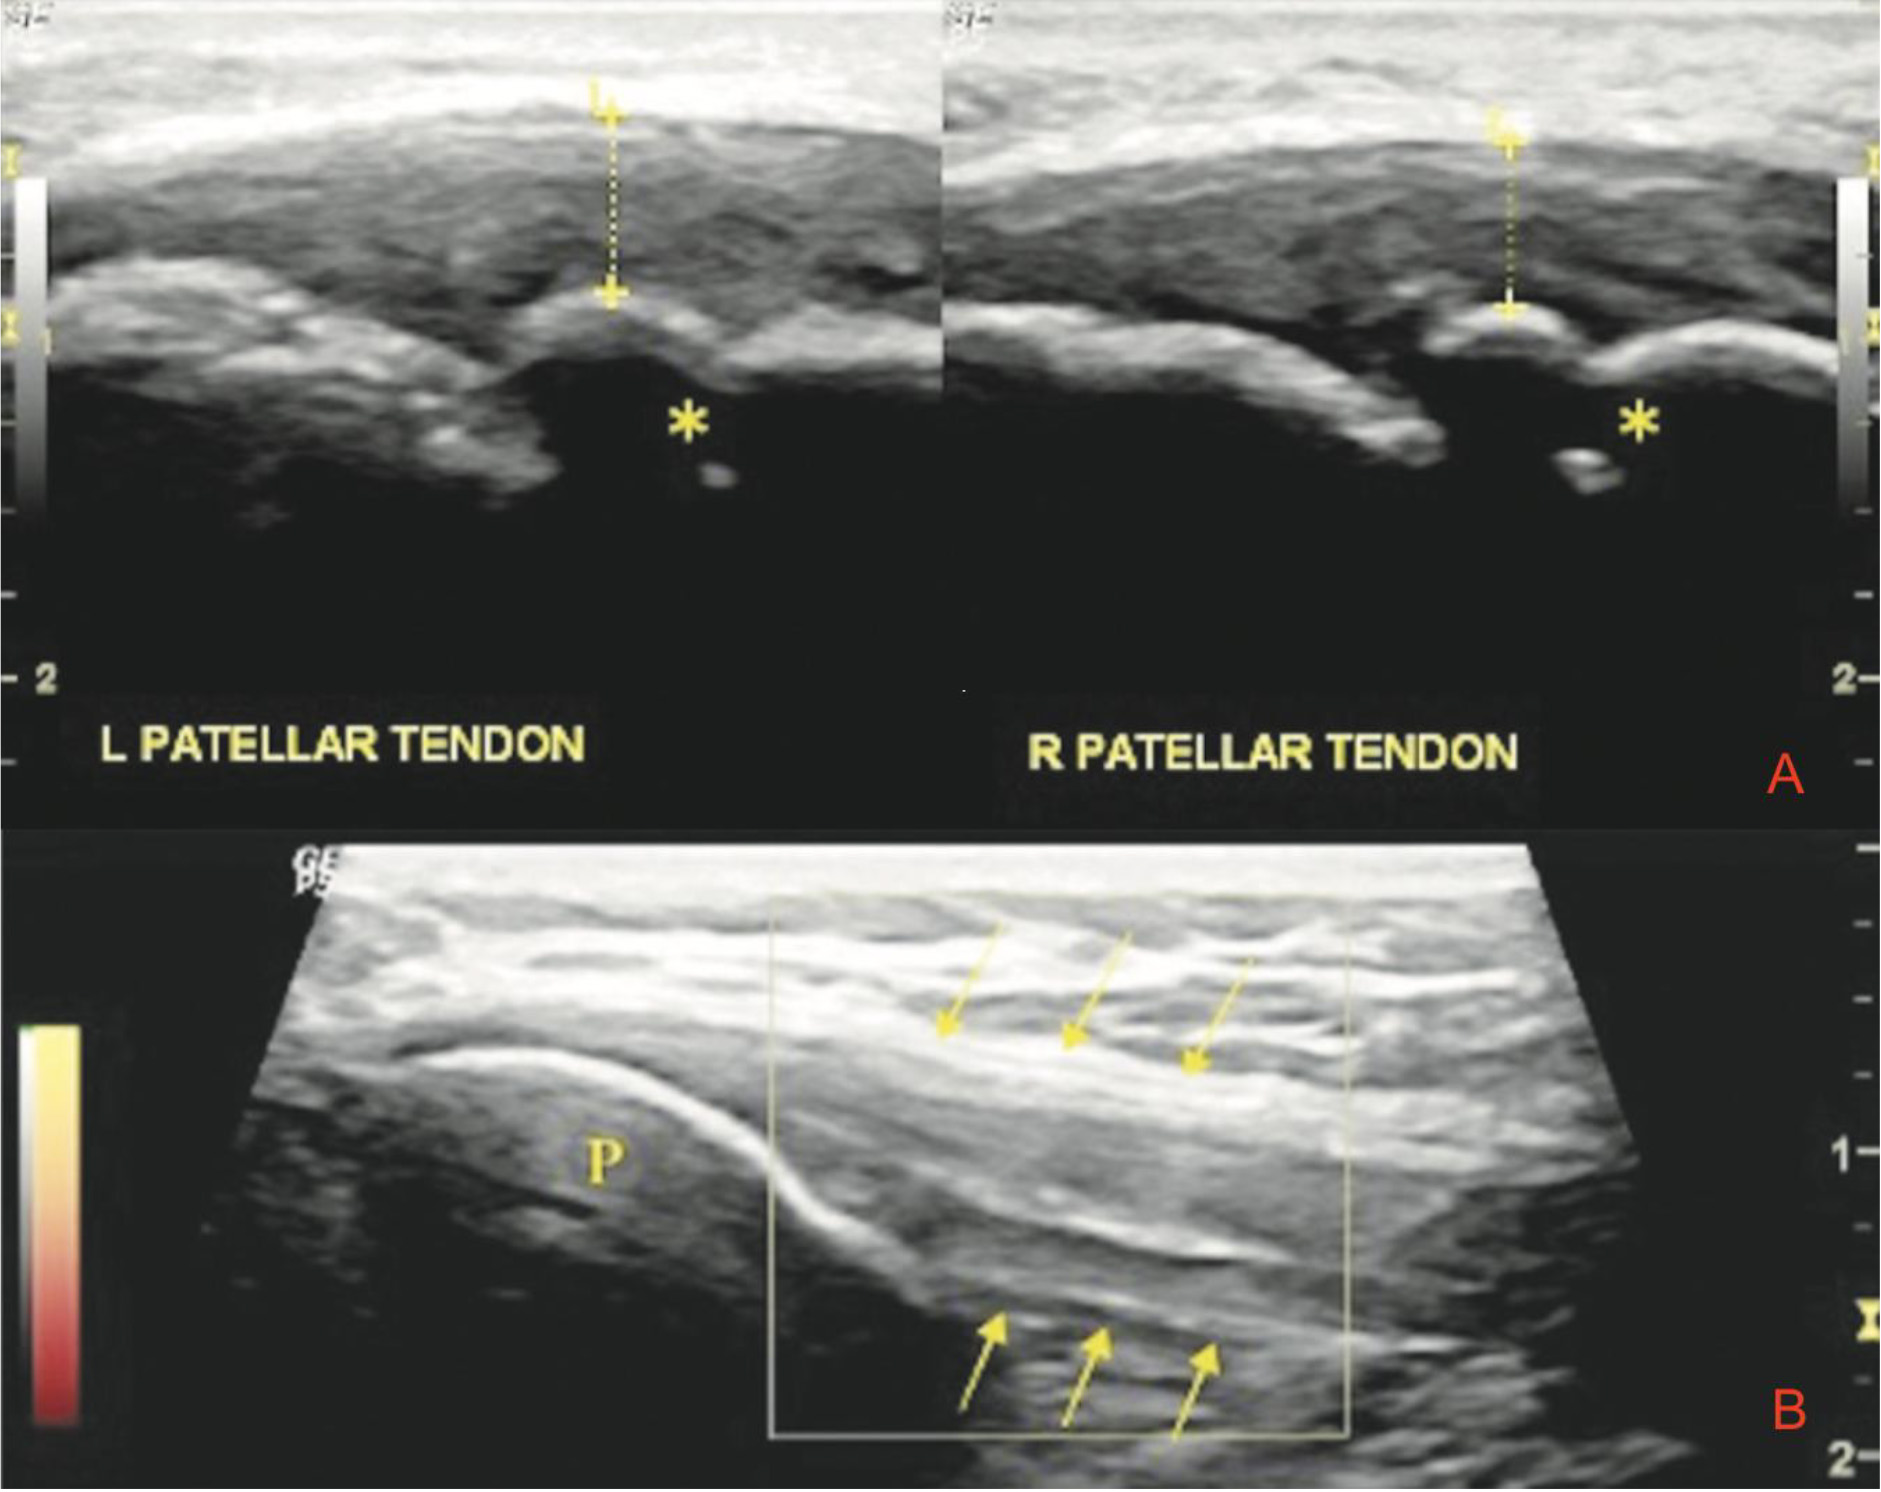 A. Evaluation of the attachment site of the patellar tendon to the tibial tuberosity on the left and right sides in Osgood-Schlatter disease. The left patellar tendon was measured to be thicker than the right side (5.23 mm vs. 4.83 mm). Cortical irregularity in the tibial tuberosity is notable bilaterally (asterisk). B. Ultrasound image of a patient’s knee with Jumper’s knee showing thickening and a hypoechoic area at the proximal part of the patellar tendon [16].